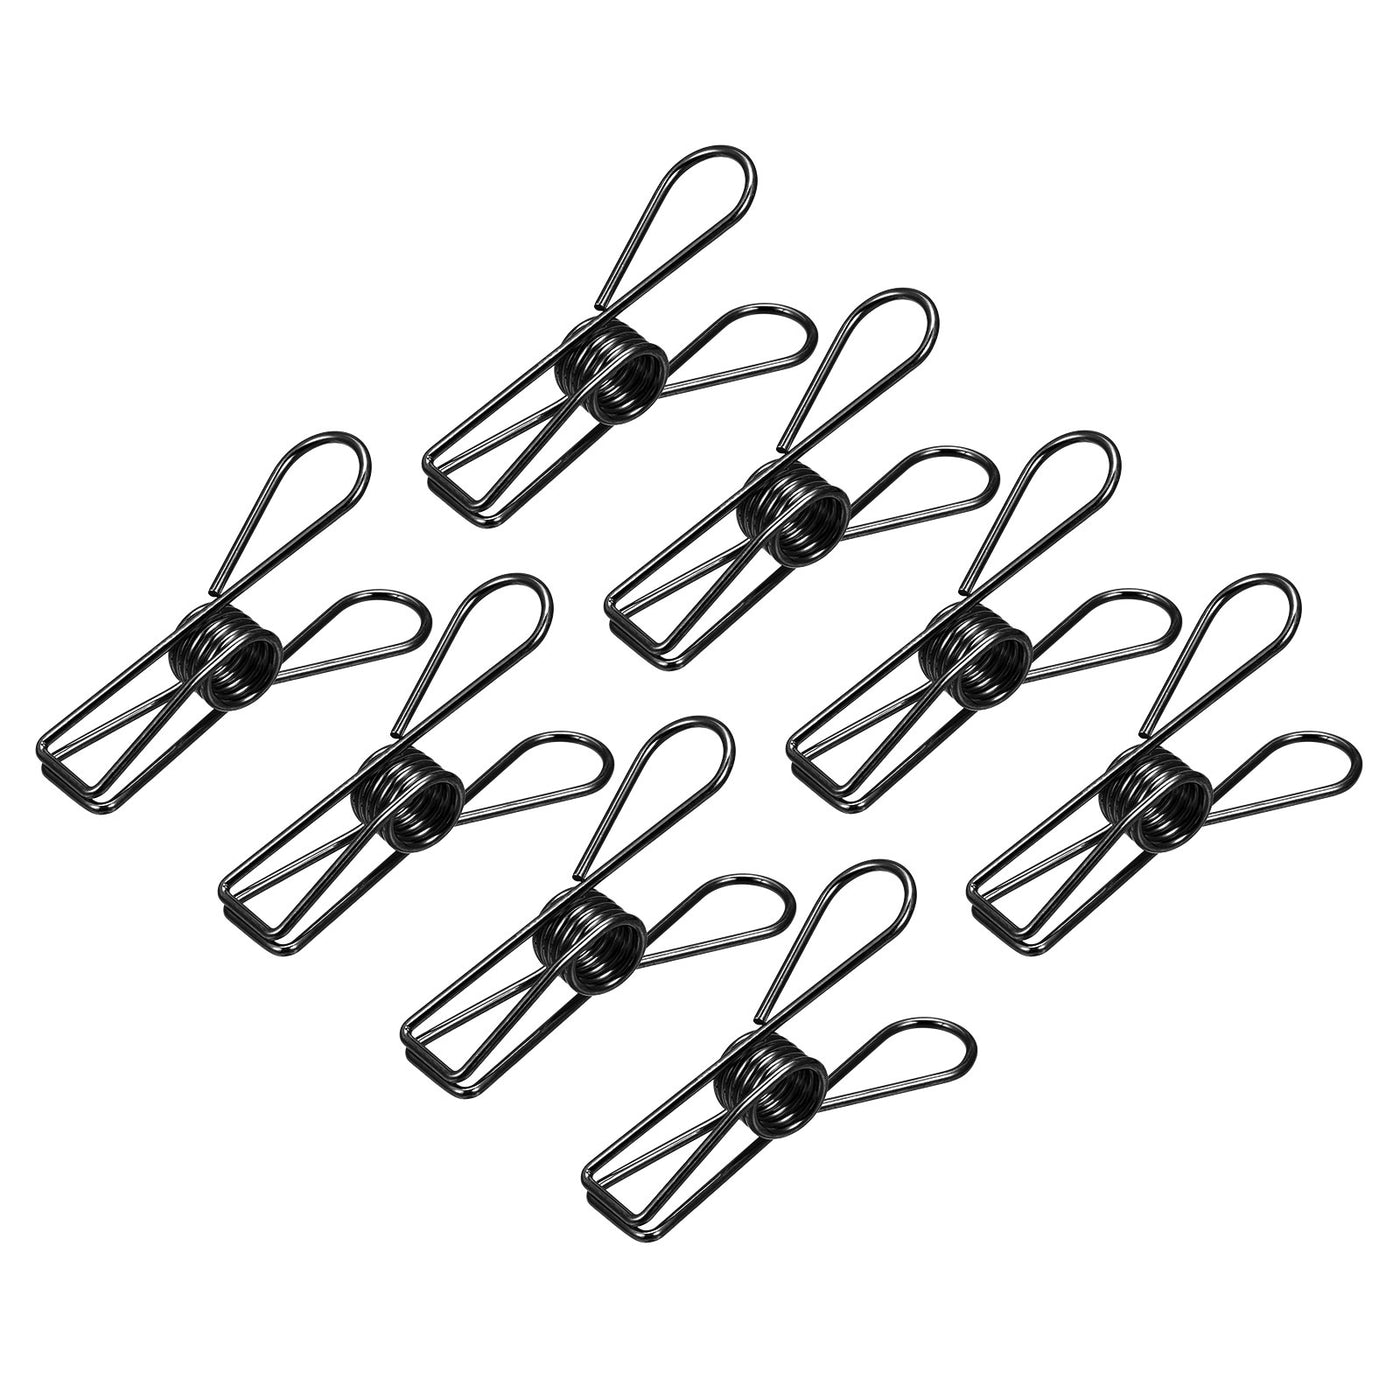 uxcell Uxcell Tablecloth Clips, 70mm Carbon Steel Clamps for Fix Table Cloth, Black 8 Pcs